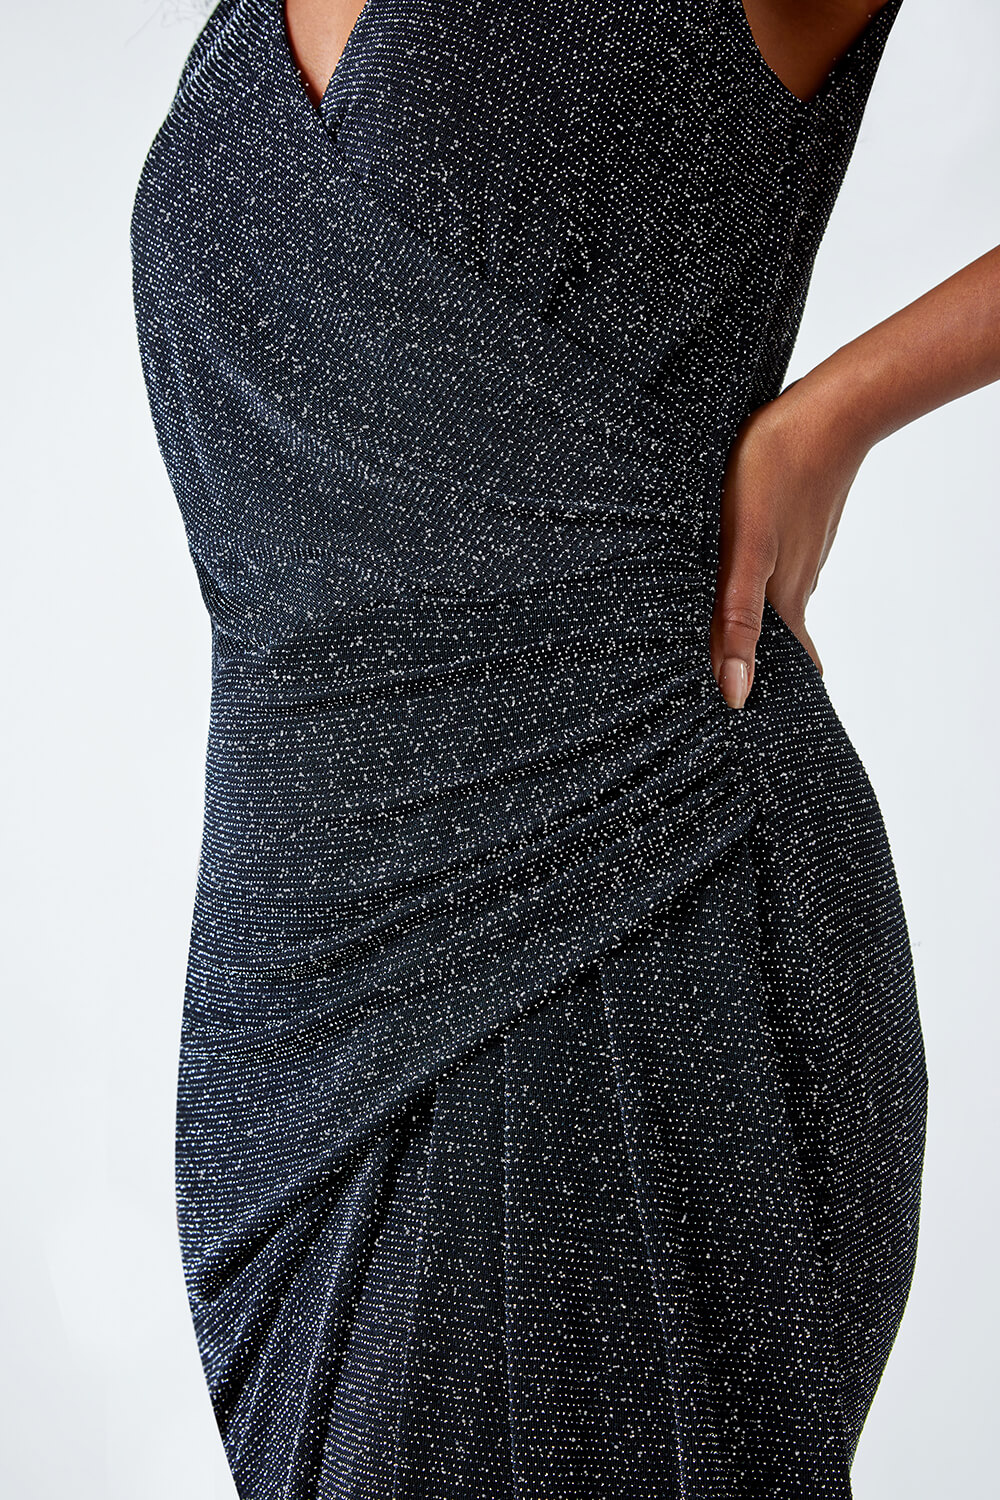 Silver Petite Ruched Wrap Stretch Dress, Image 5 of 5